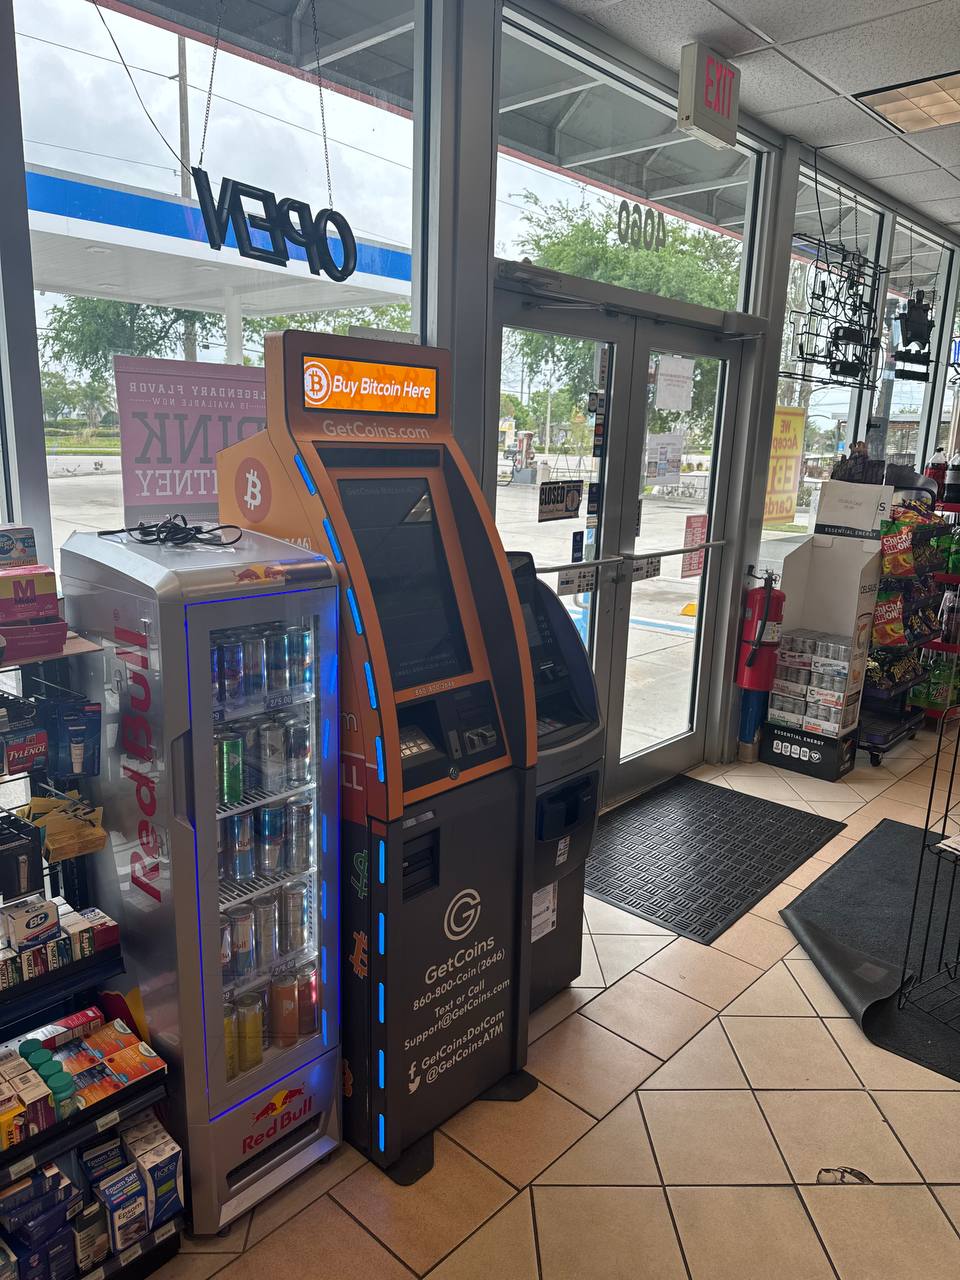 Getcoins - Bitcoin ATM - Inside of Mobil in Oldsmar, Florida